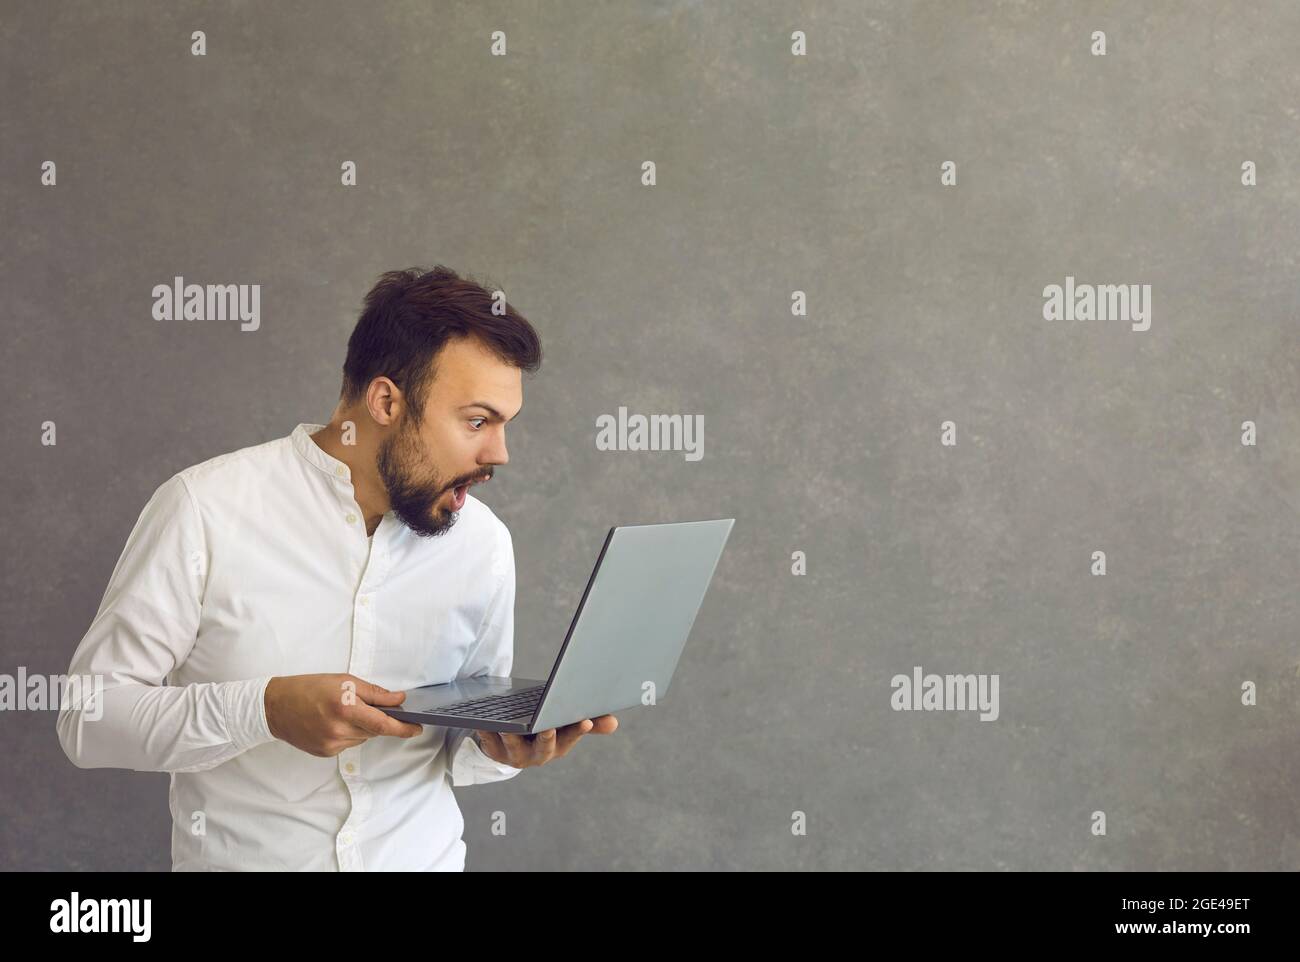 Young man shocked and surprised, looks at the laptop screen. Stock Photo